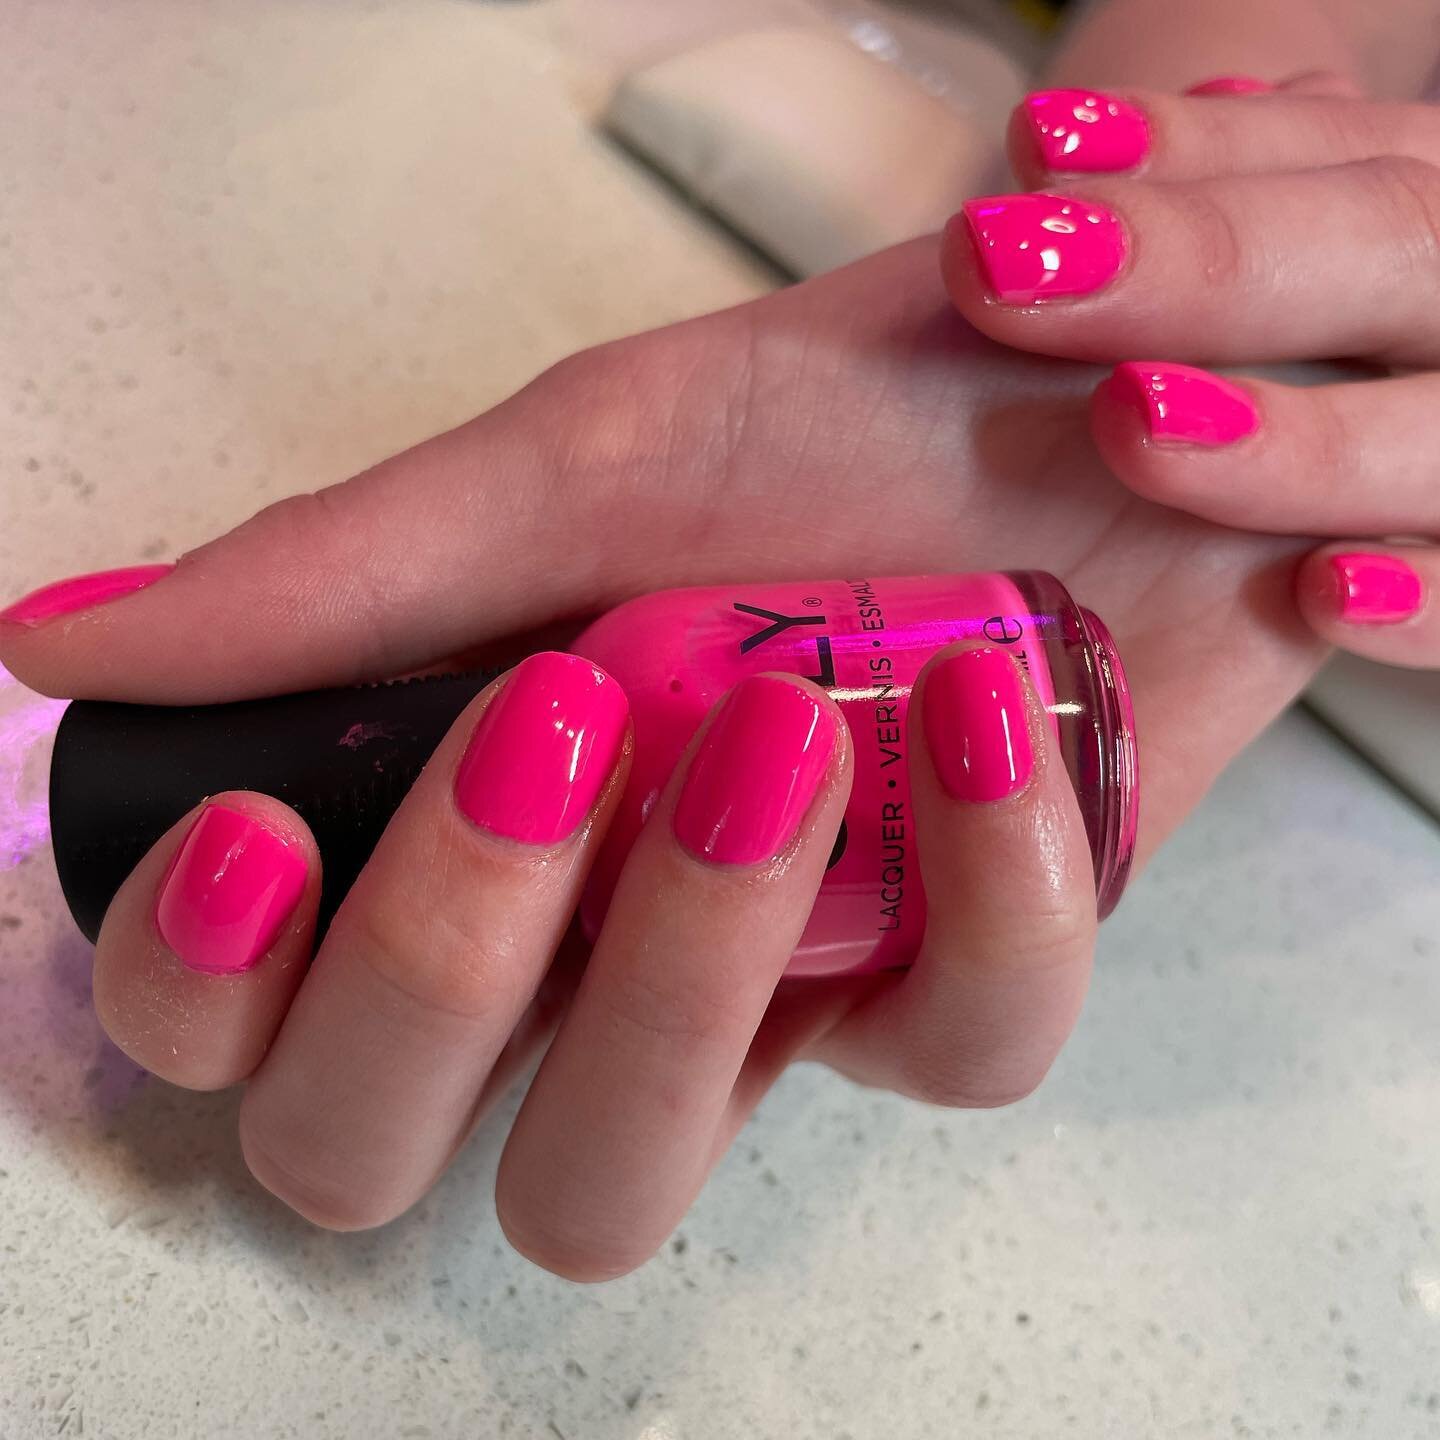 &bull;S U M M E R &bull; V I B E Z&bull;

#09NailStudio #NailsBySkarlett  #sanantoniotx #nailtech #girlboss #bossbabe #smallbusiness #owner #natural #nails #only #nailcare #classic #manicure #polishgirl #orly #neon #pink #summer #vibes #only #nailsof